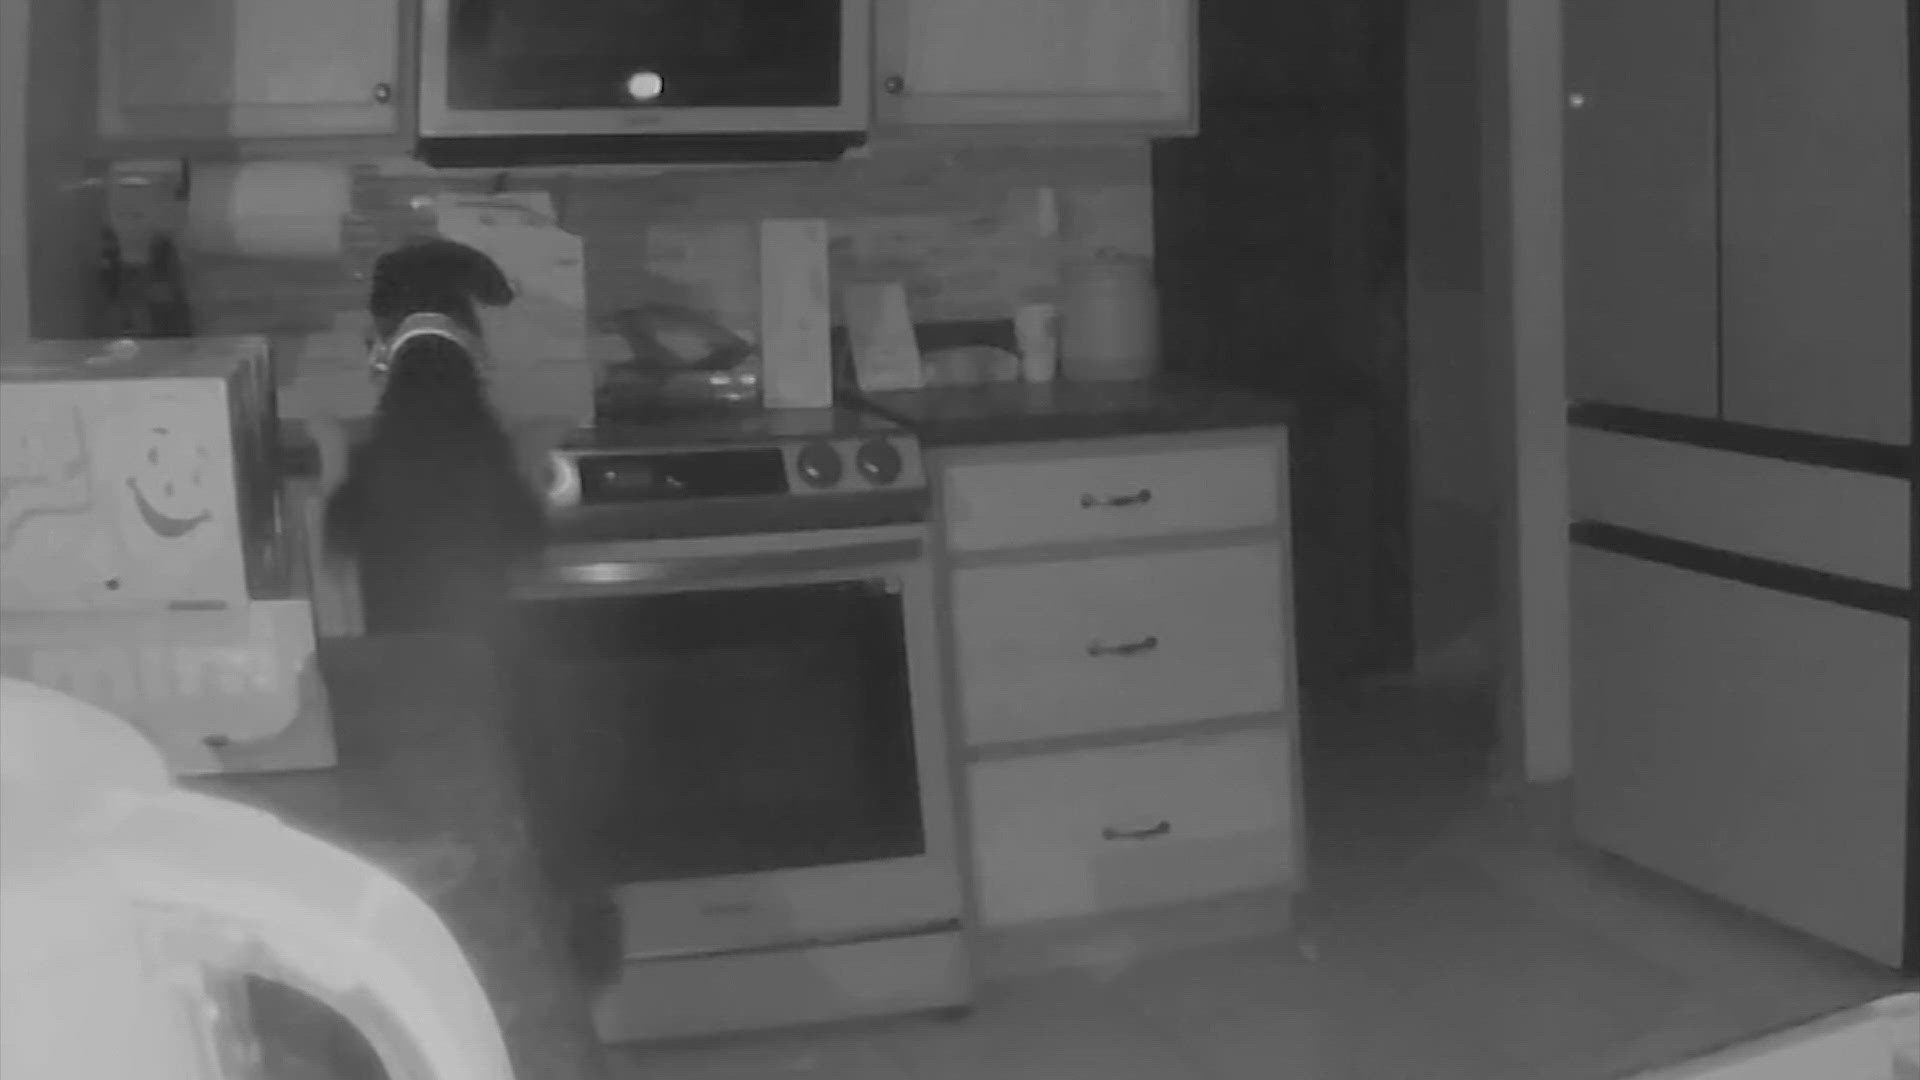 A home surveillance camera caught the moment a dog turned on a stove and lit a house on fire in Colorado Springs.